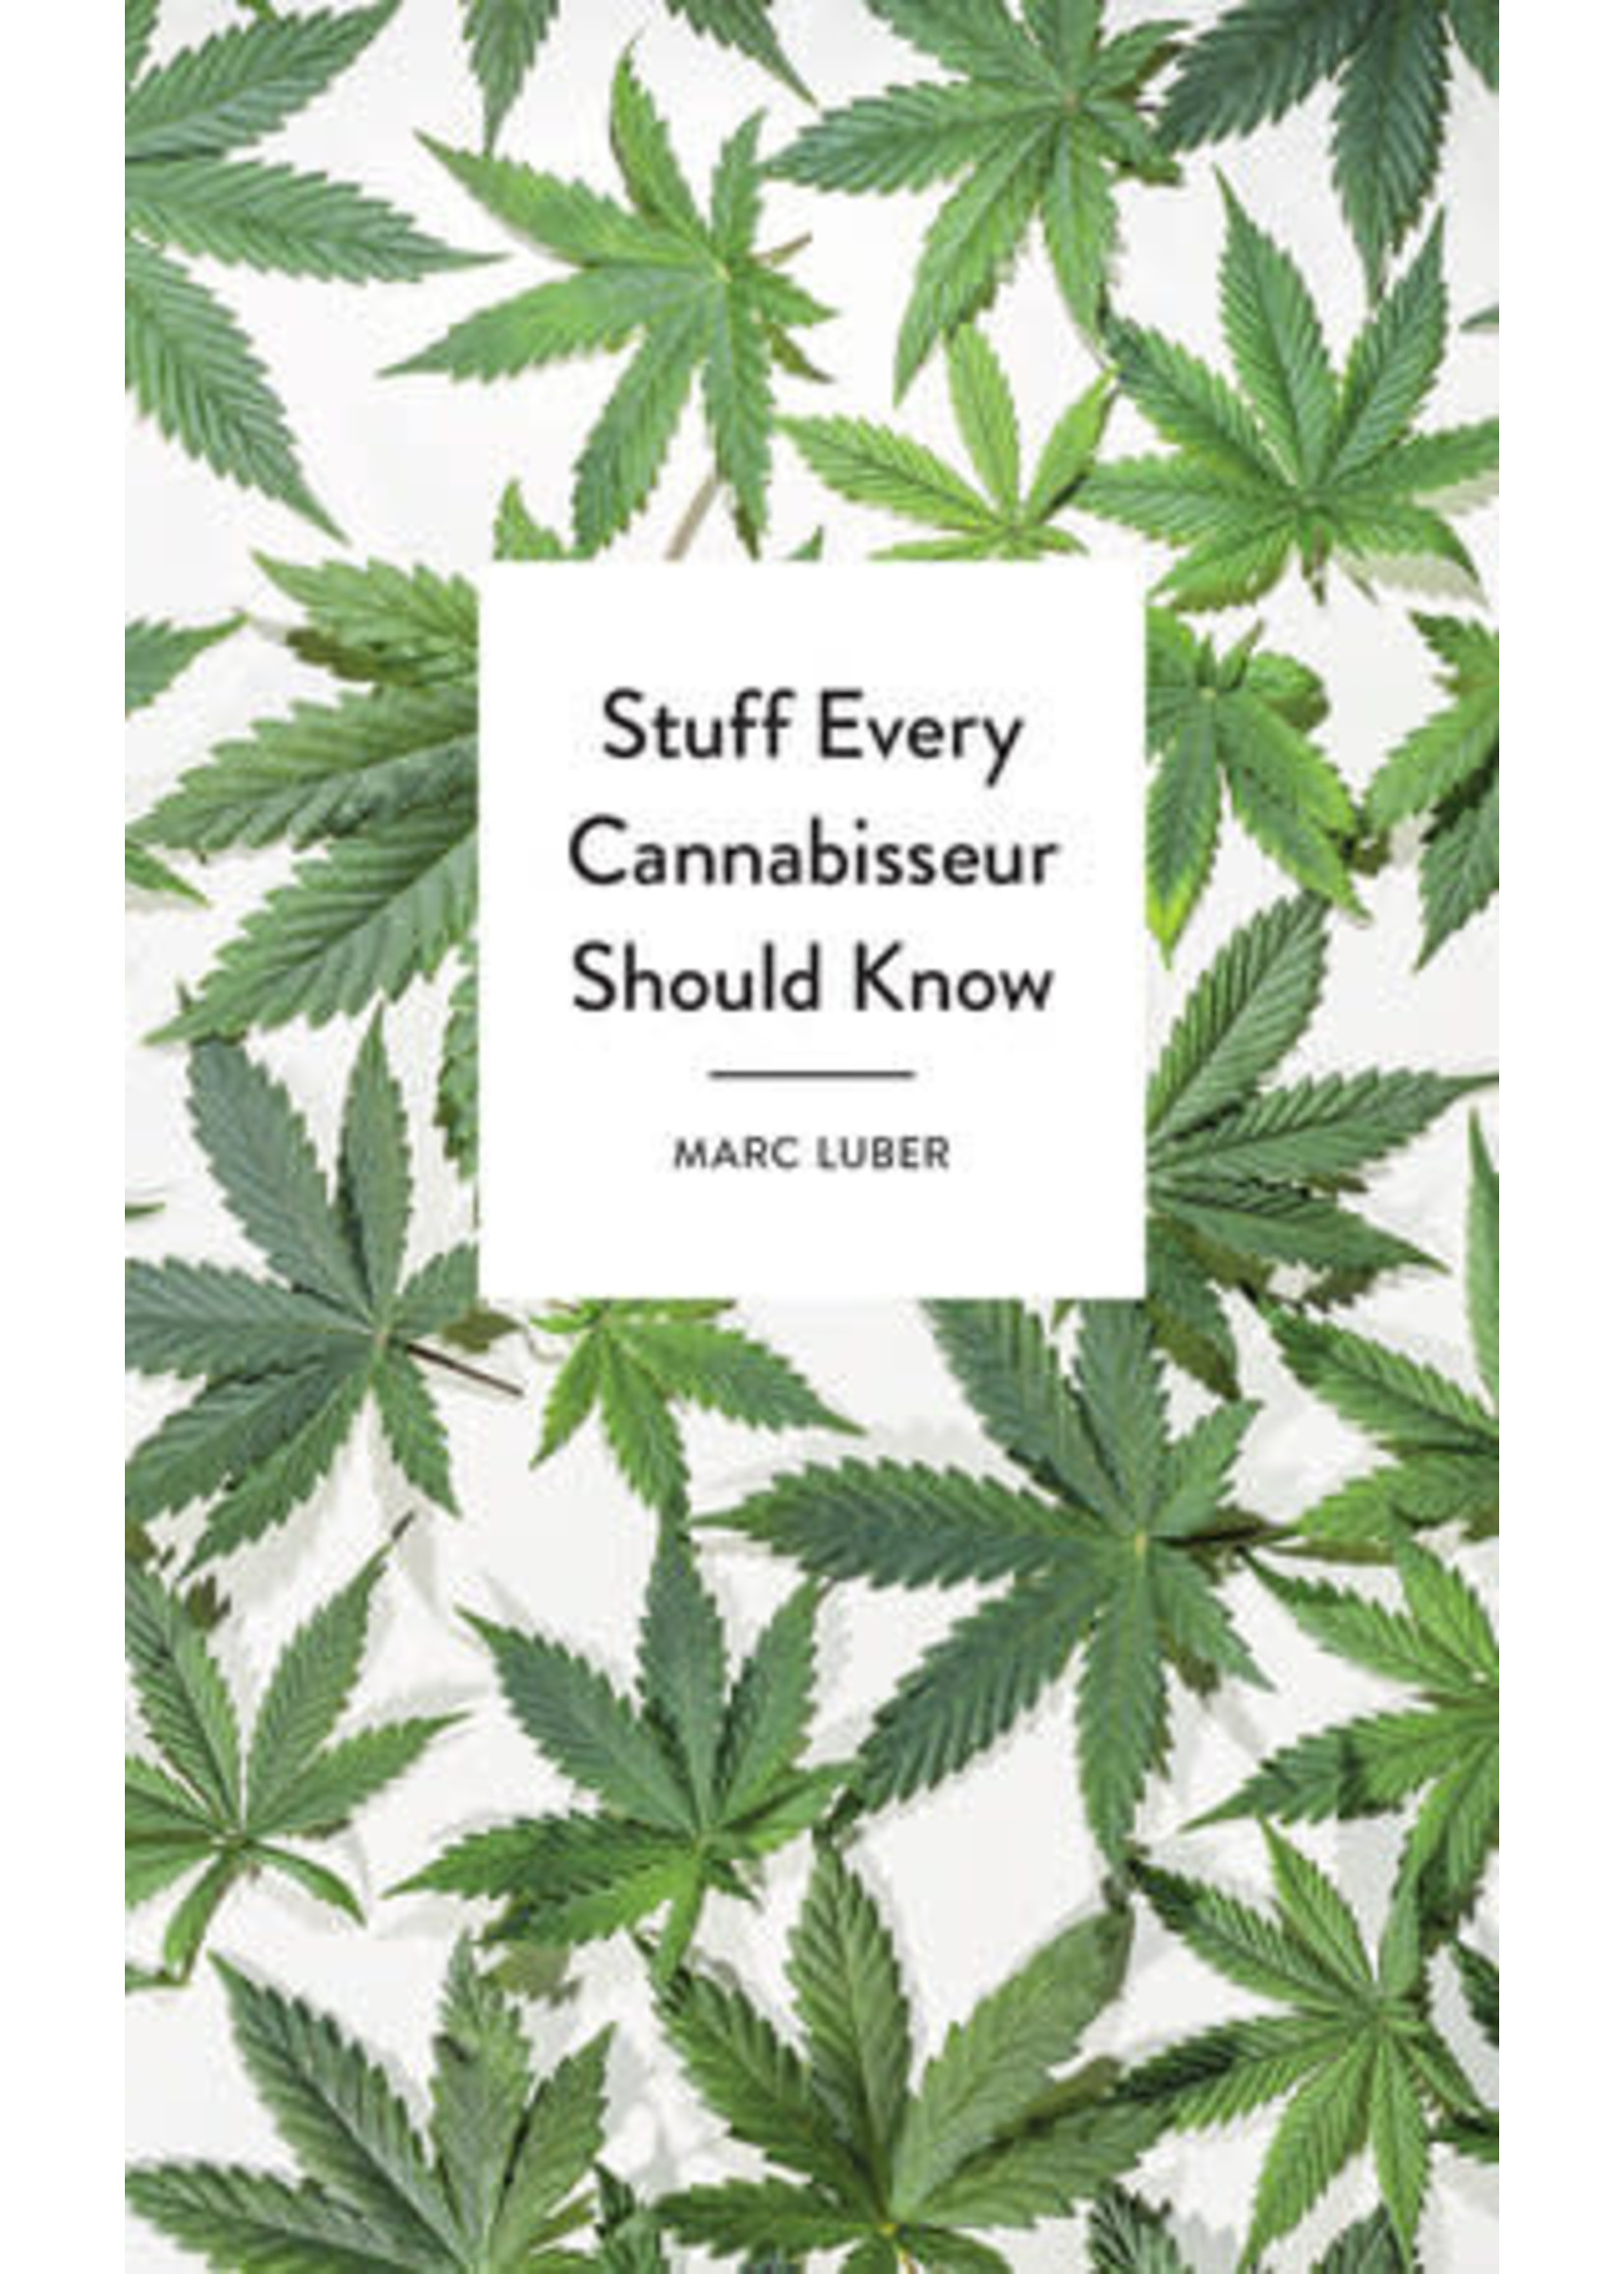 PENGUIN RANDOM HOUSE PENGUIN RANDOM HOUSE-STUFF EVERY CANNABISSEUR SHOULD KNOW